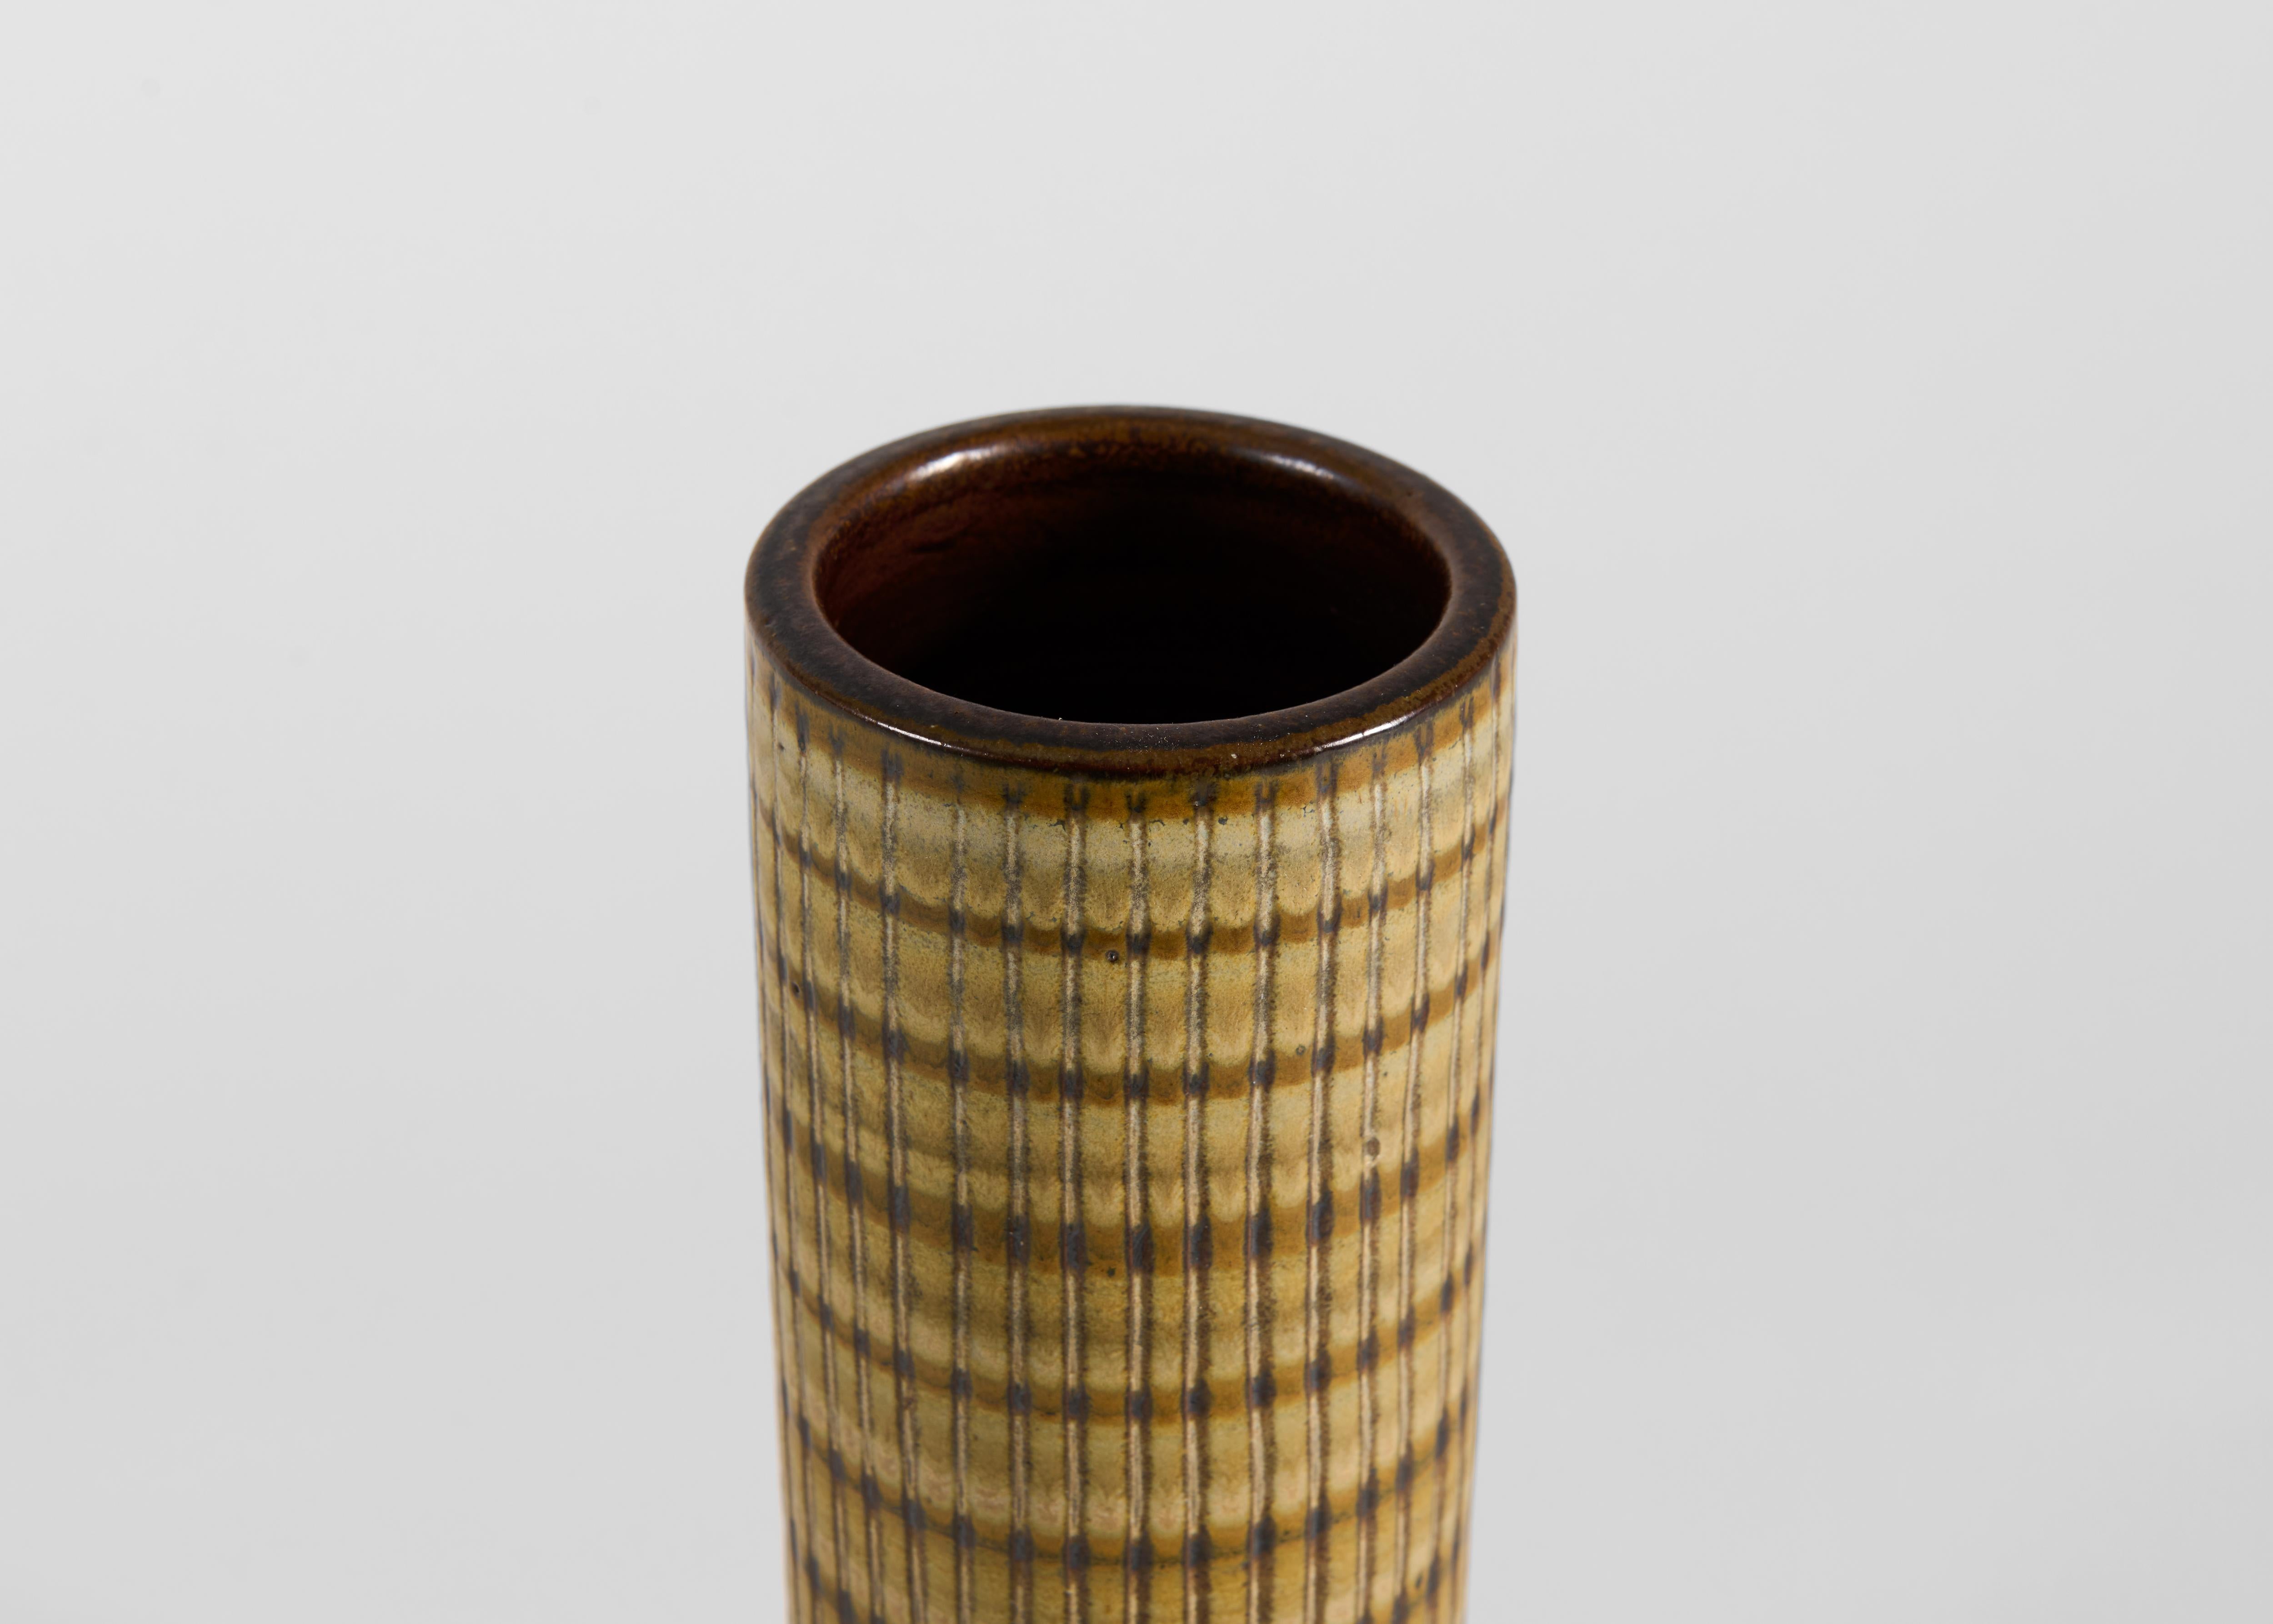 Swedish Cylindrical Ceramic Vase with Earth-Toned Glaze, Wallåkra, Sweden, 1960s For Sale